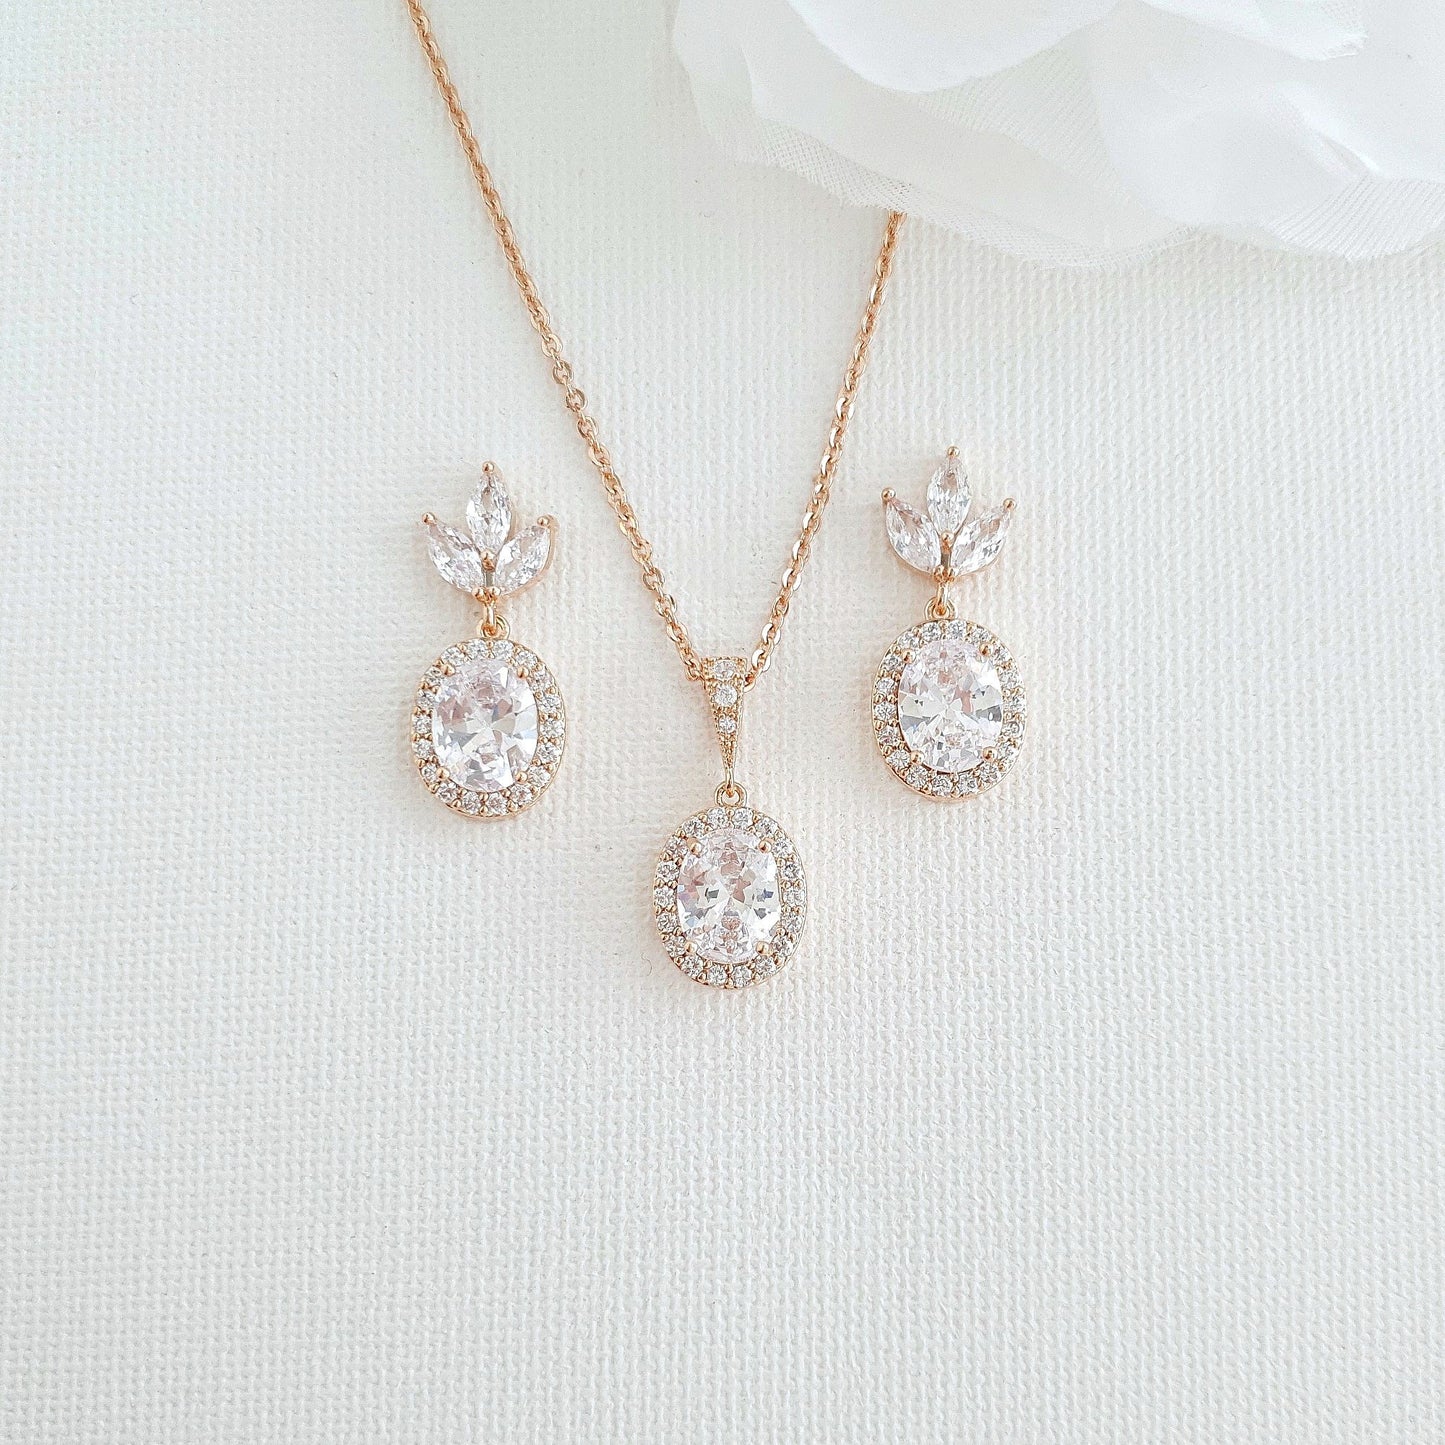 Oval Bridal Jewelry Set-Emily - PoetryDesigns